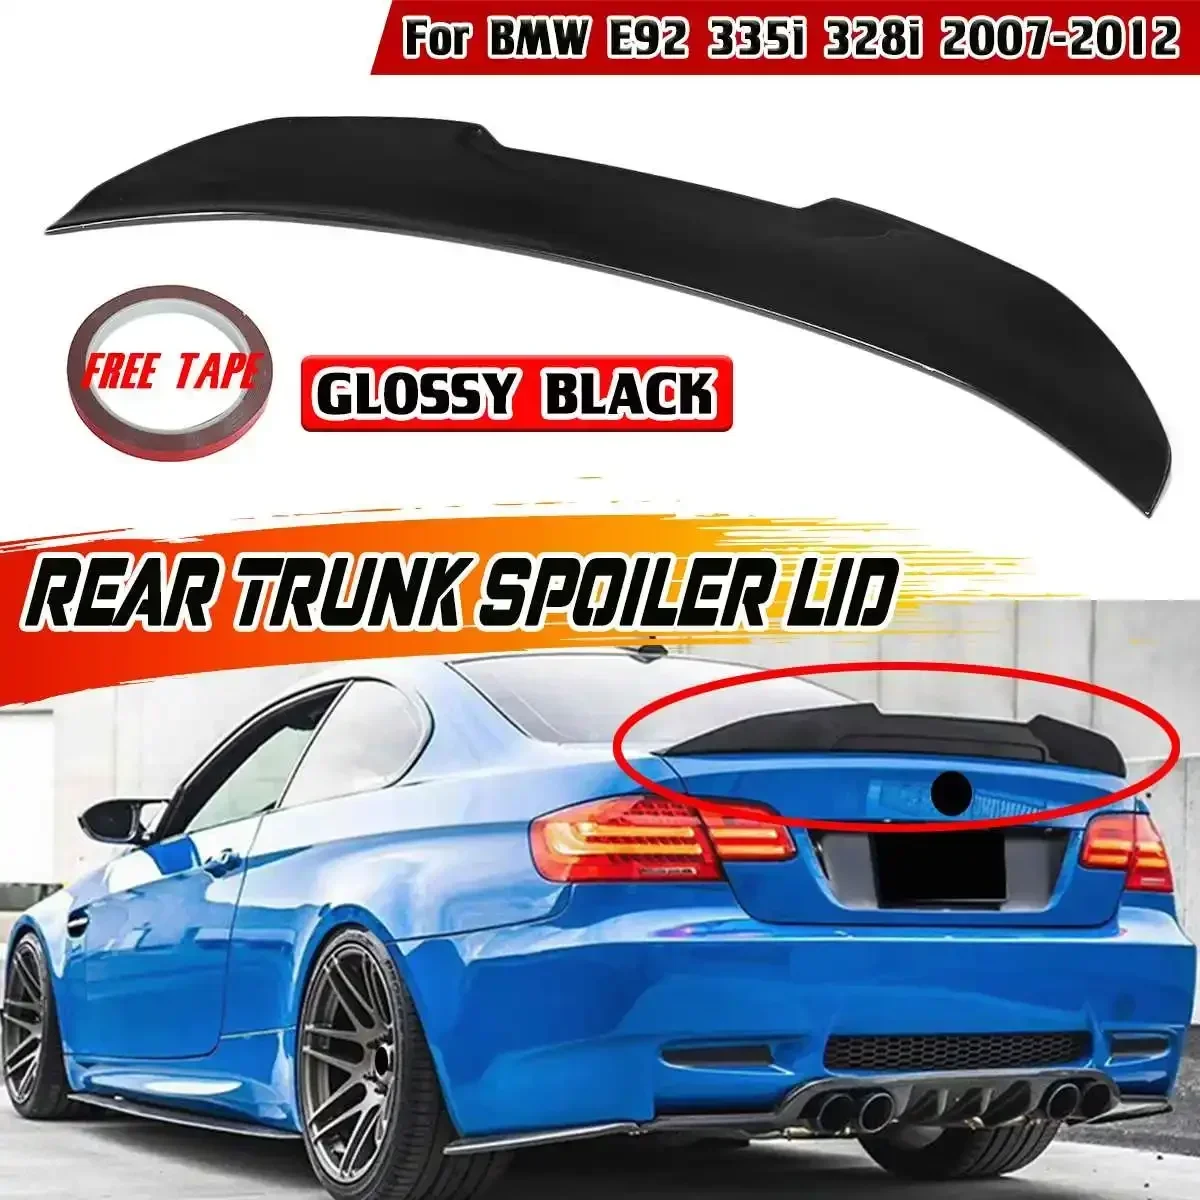 

P/M4/PSM Style Car Rear Trunk Spoiler Wing Lid Extension Wing Lip For BMW E92 M3 2DR Coupe 2007-2013 Car Rear Wing Spoiler Lip